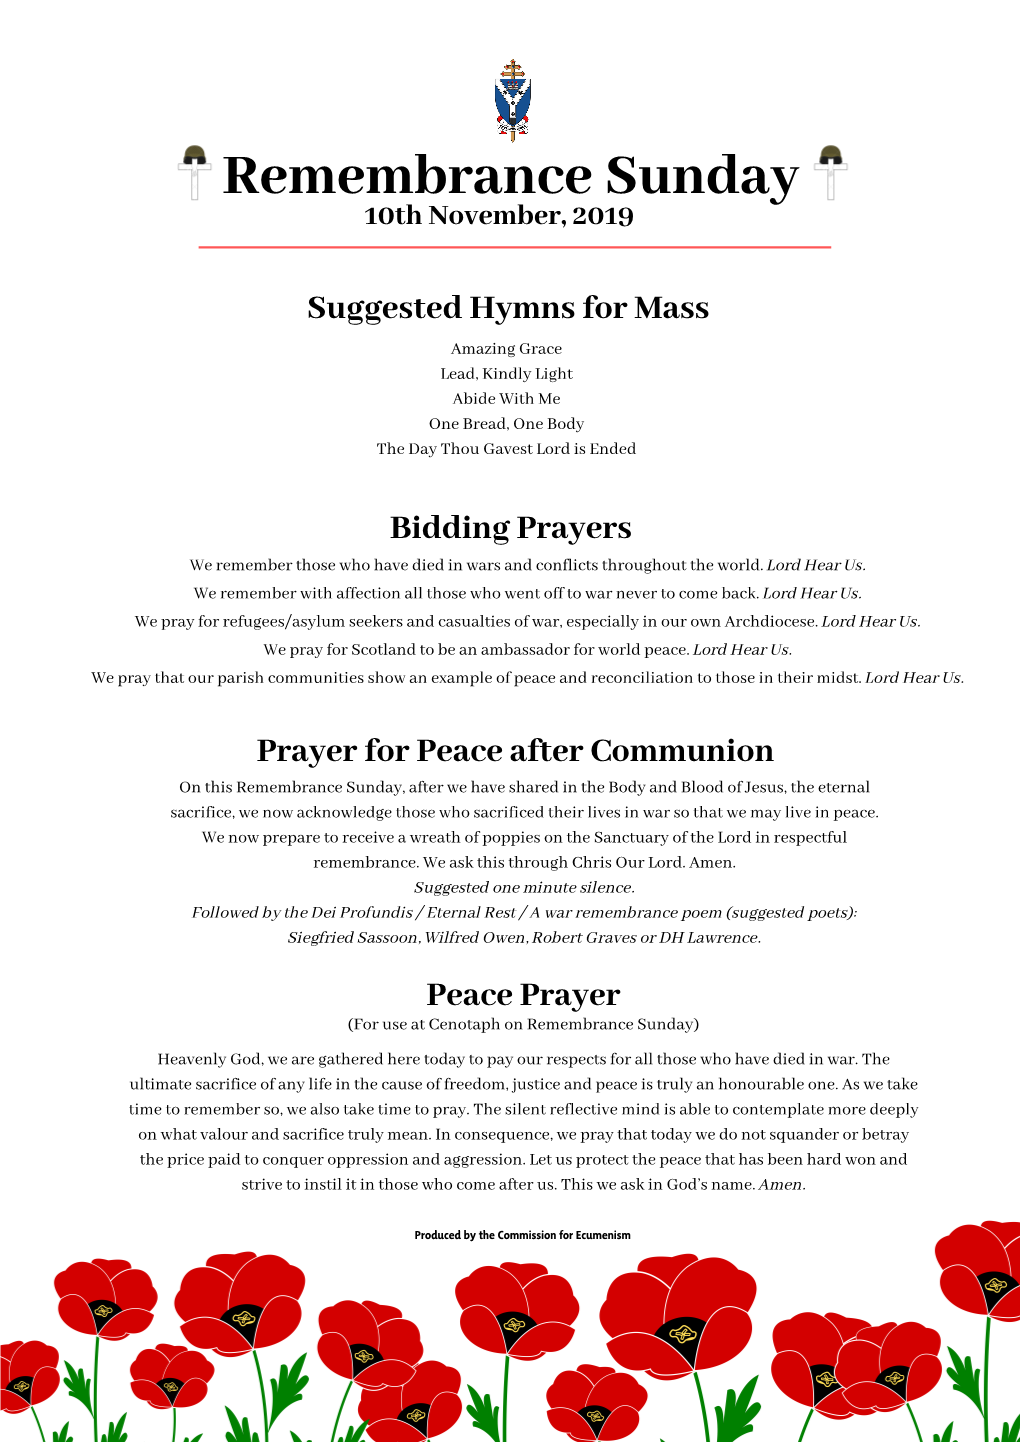 Prayer for Peace After Communion on This Remembrance Sunday, After